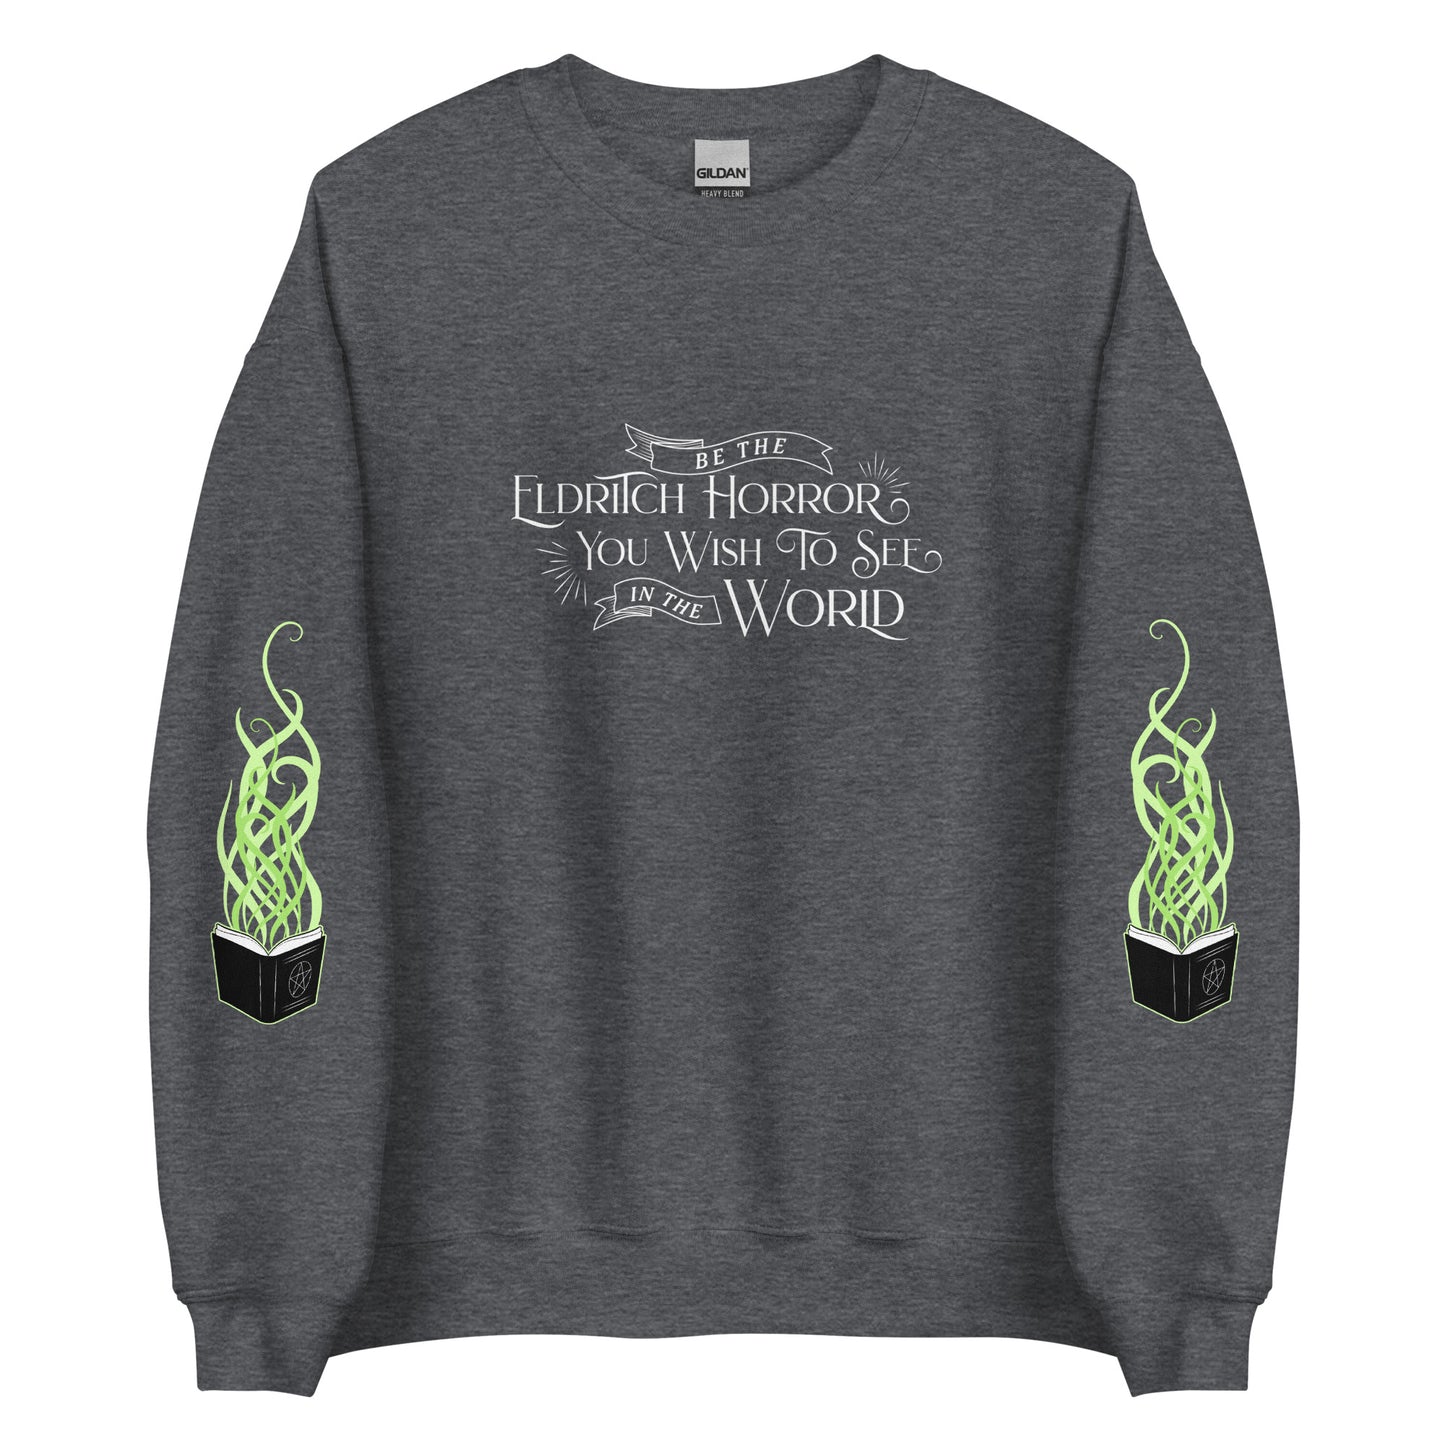 A dark heather grey crewneck sweatshirt with white old-fashioned text on the chest that reads "Be The Eldritch Horror You Wish To See In The World". On each sleeve is an illustration of a spellbook with green magical tendrils spreading upward from the pages.